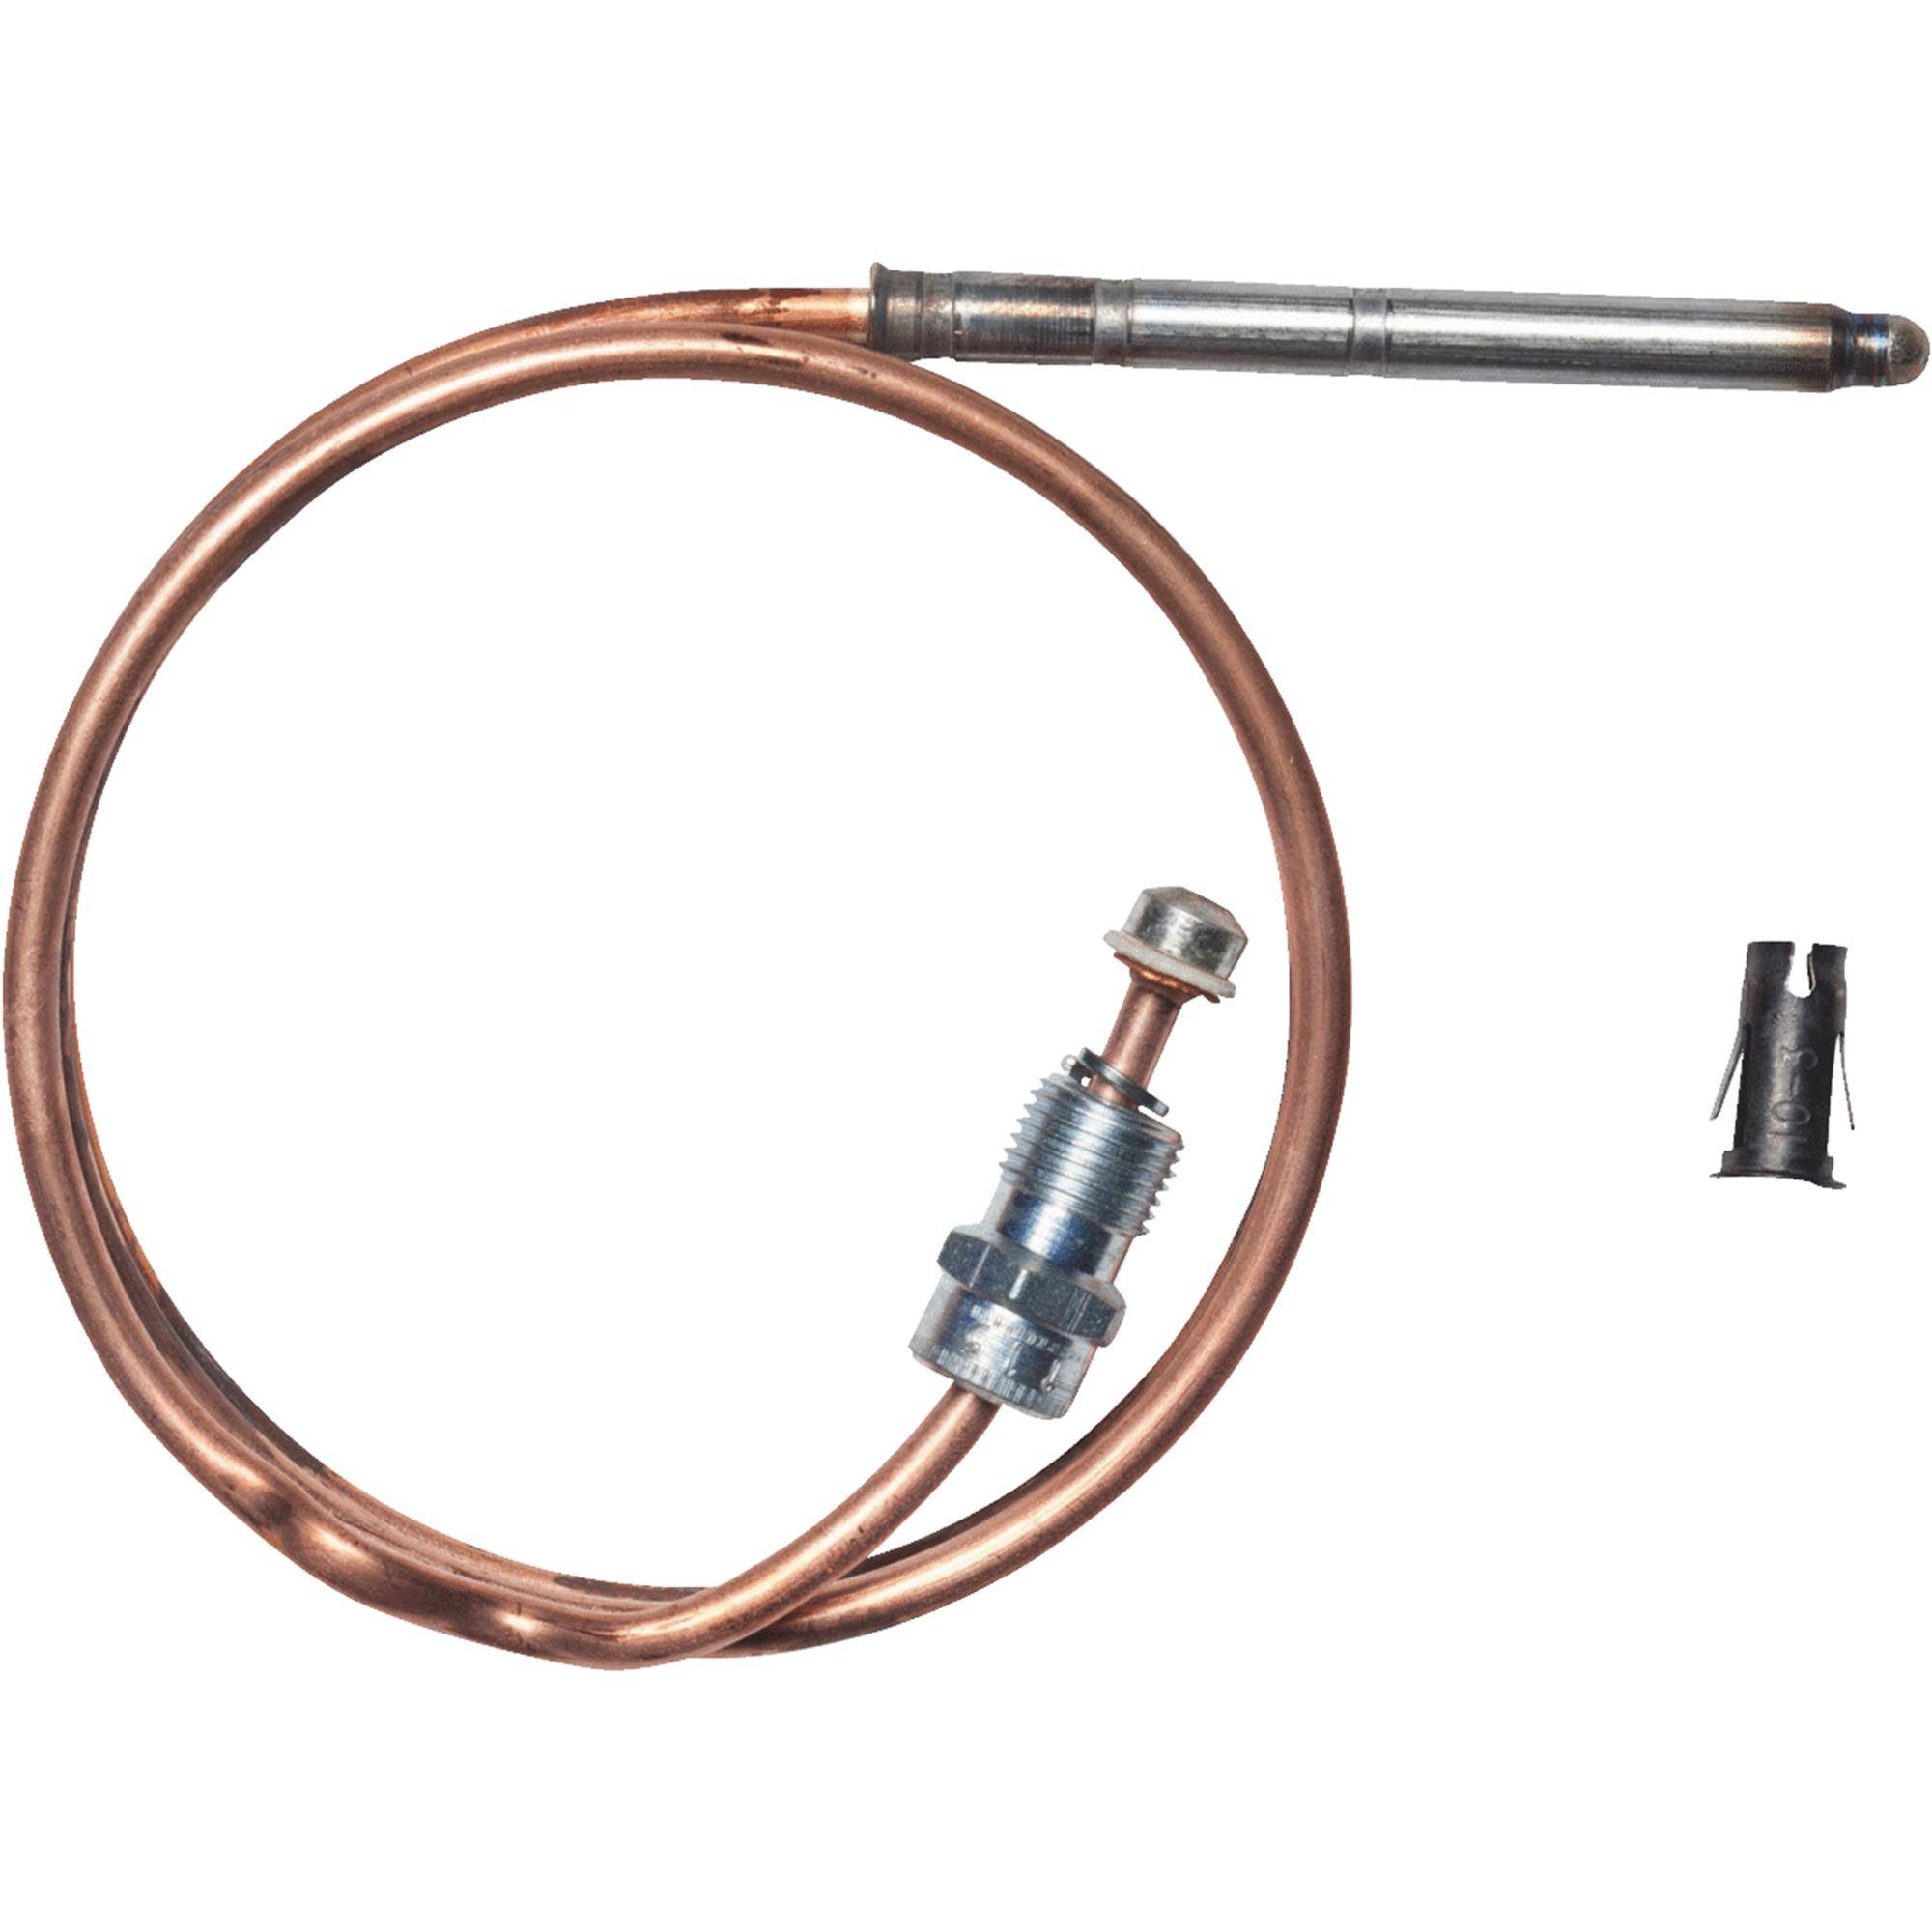 Stock image of water heater thermocouple.